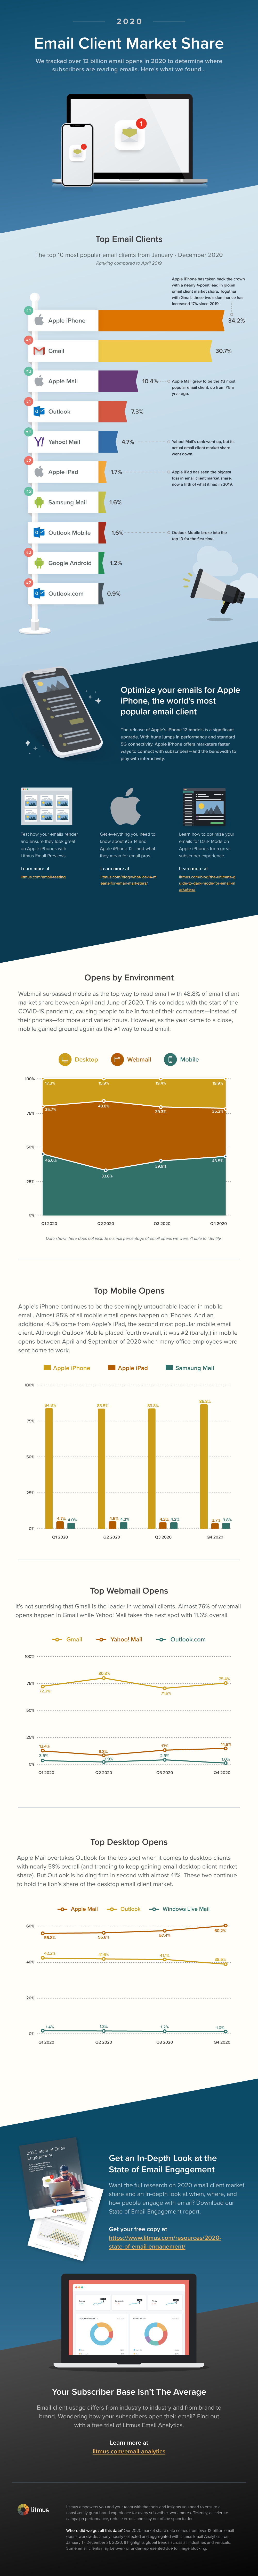 Email Client Market Share and Popularity - Litmus